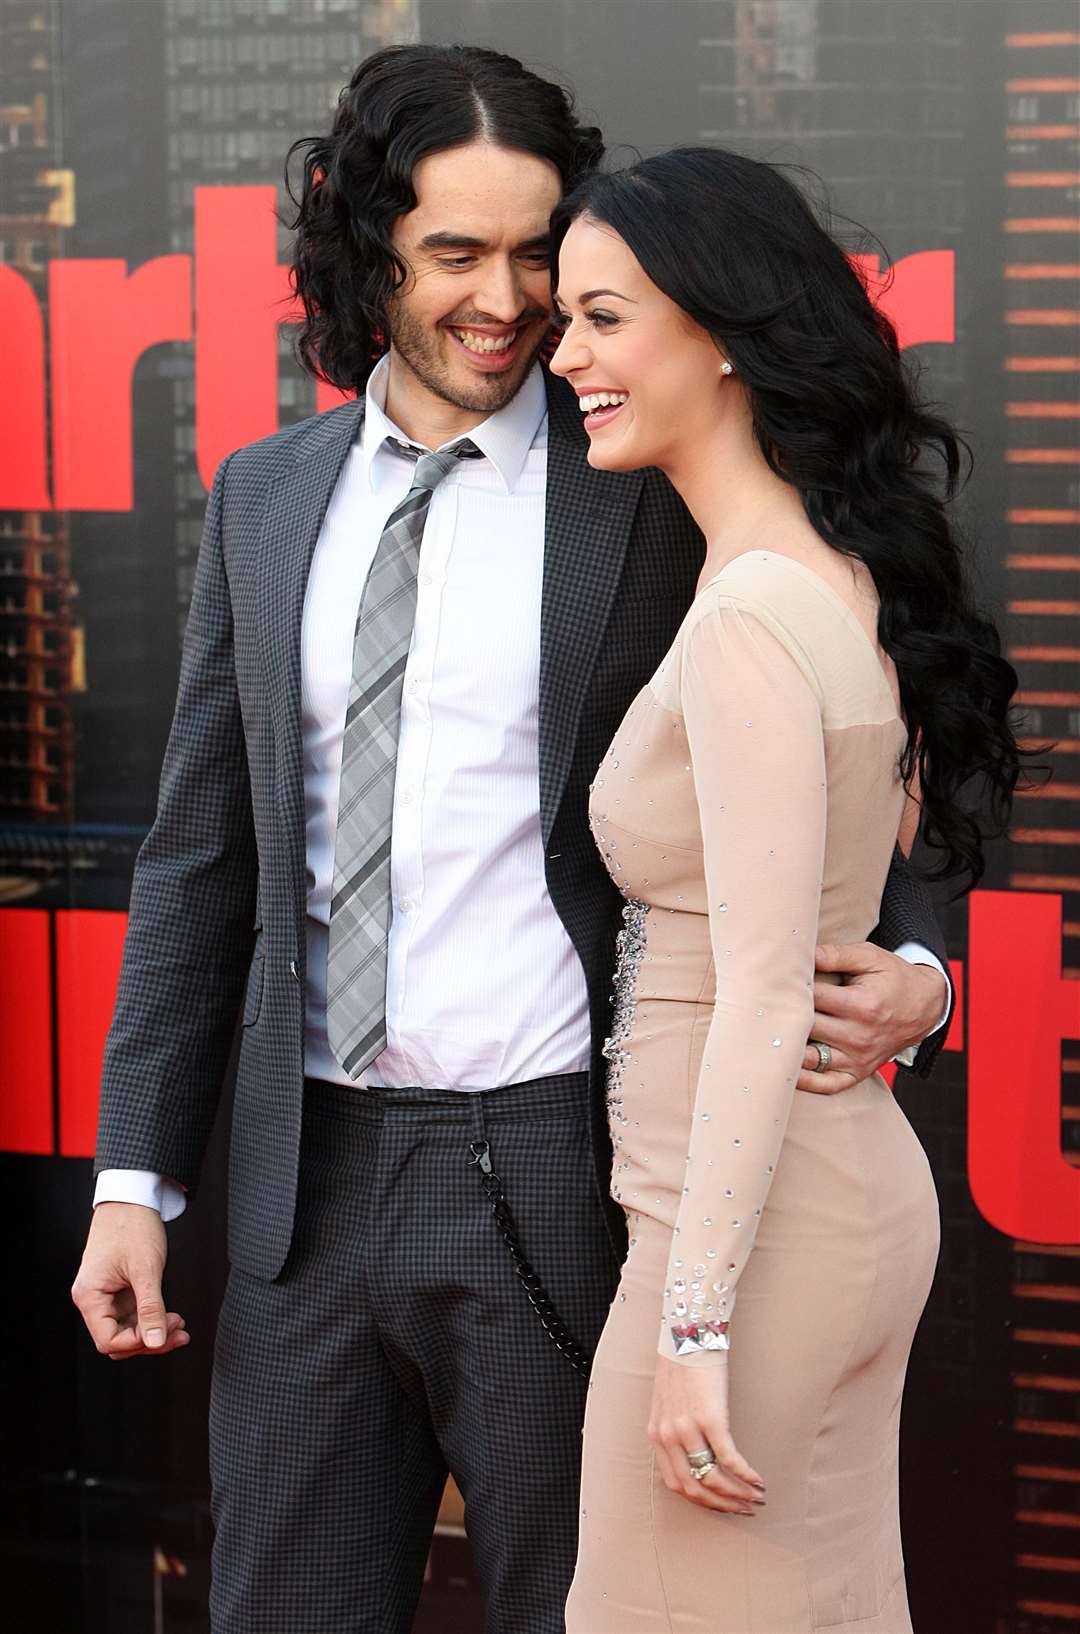 Russell Brand and Katy Perry married in 2010 (Dominic Lipinski/PA)